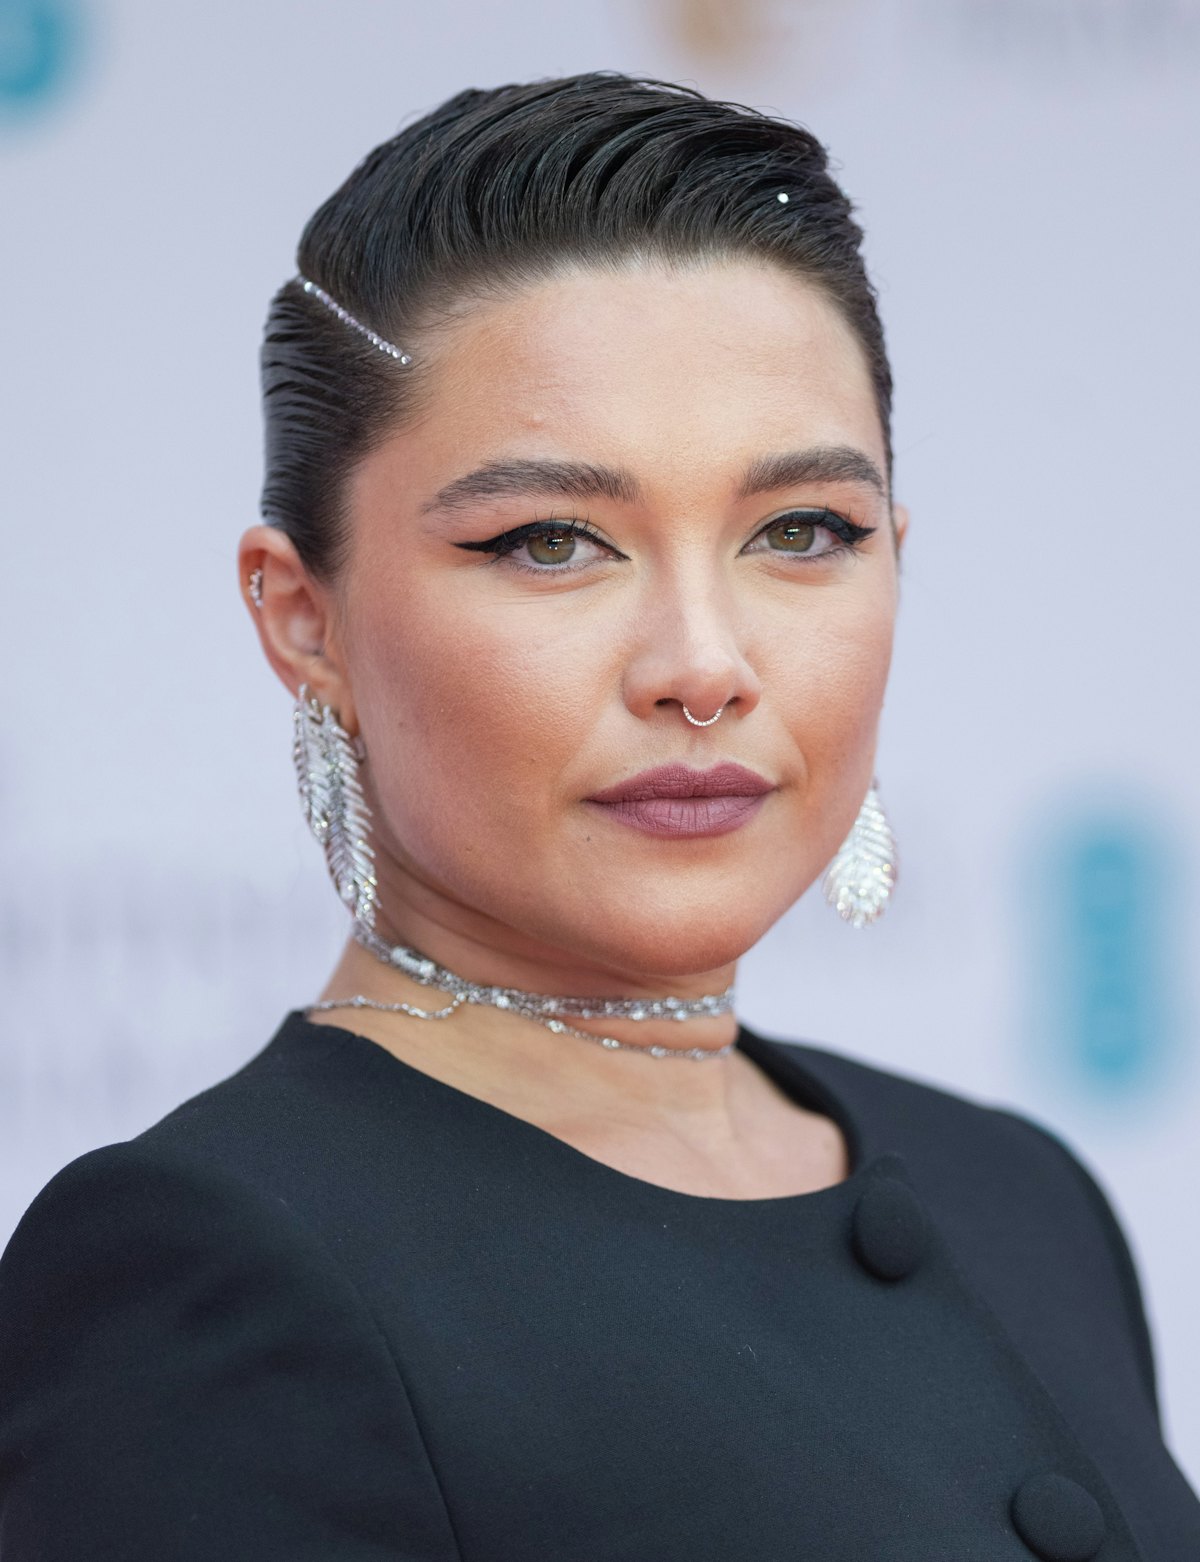 At the BAFTAs 2022, Florence Pugh had one of the best hairstyles.